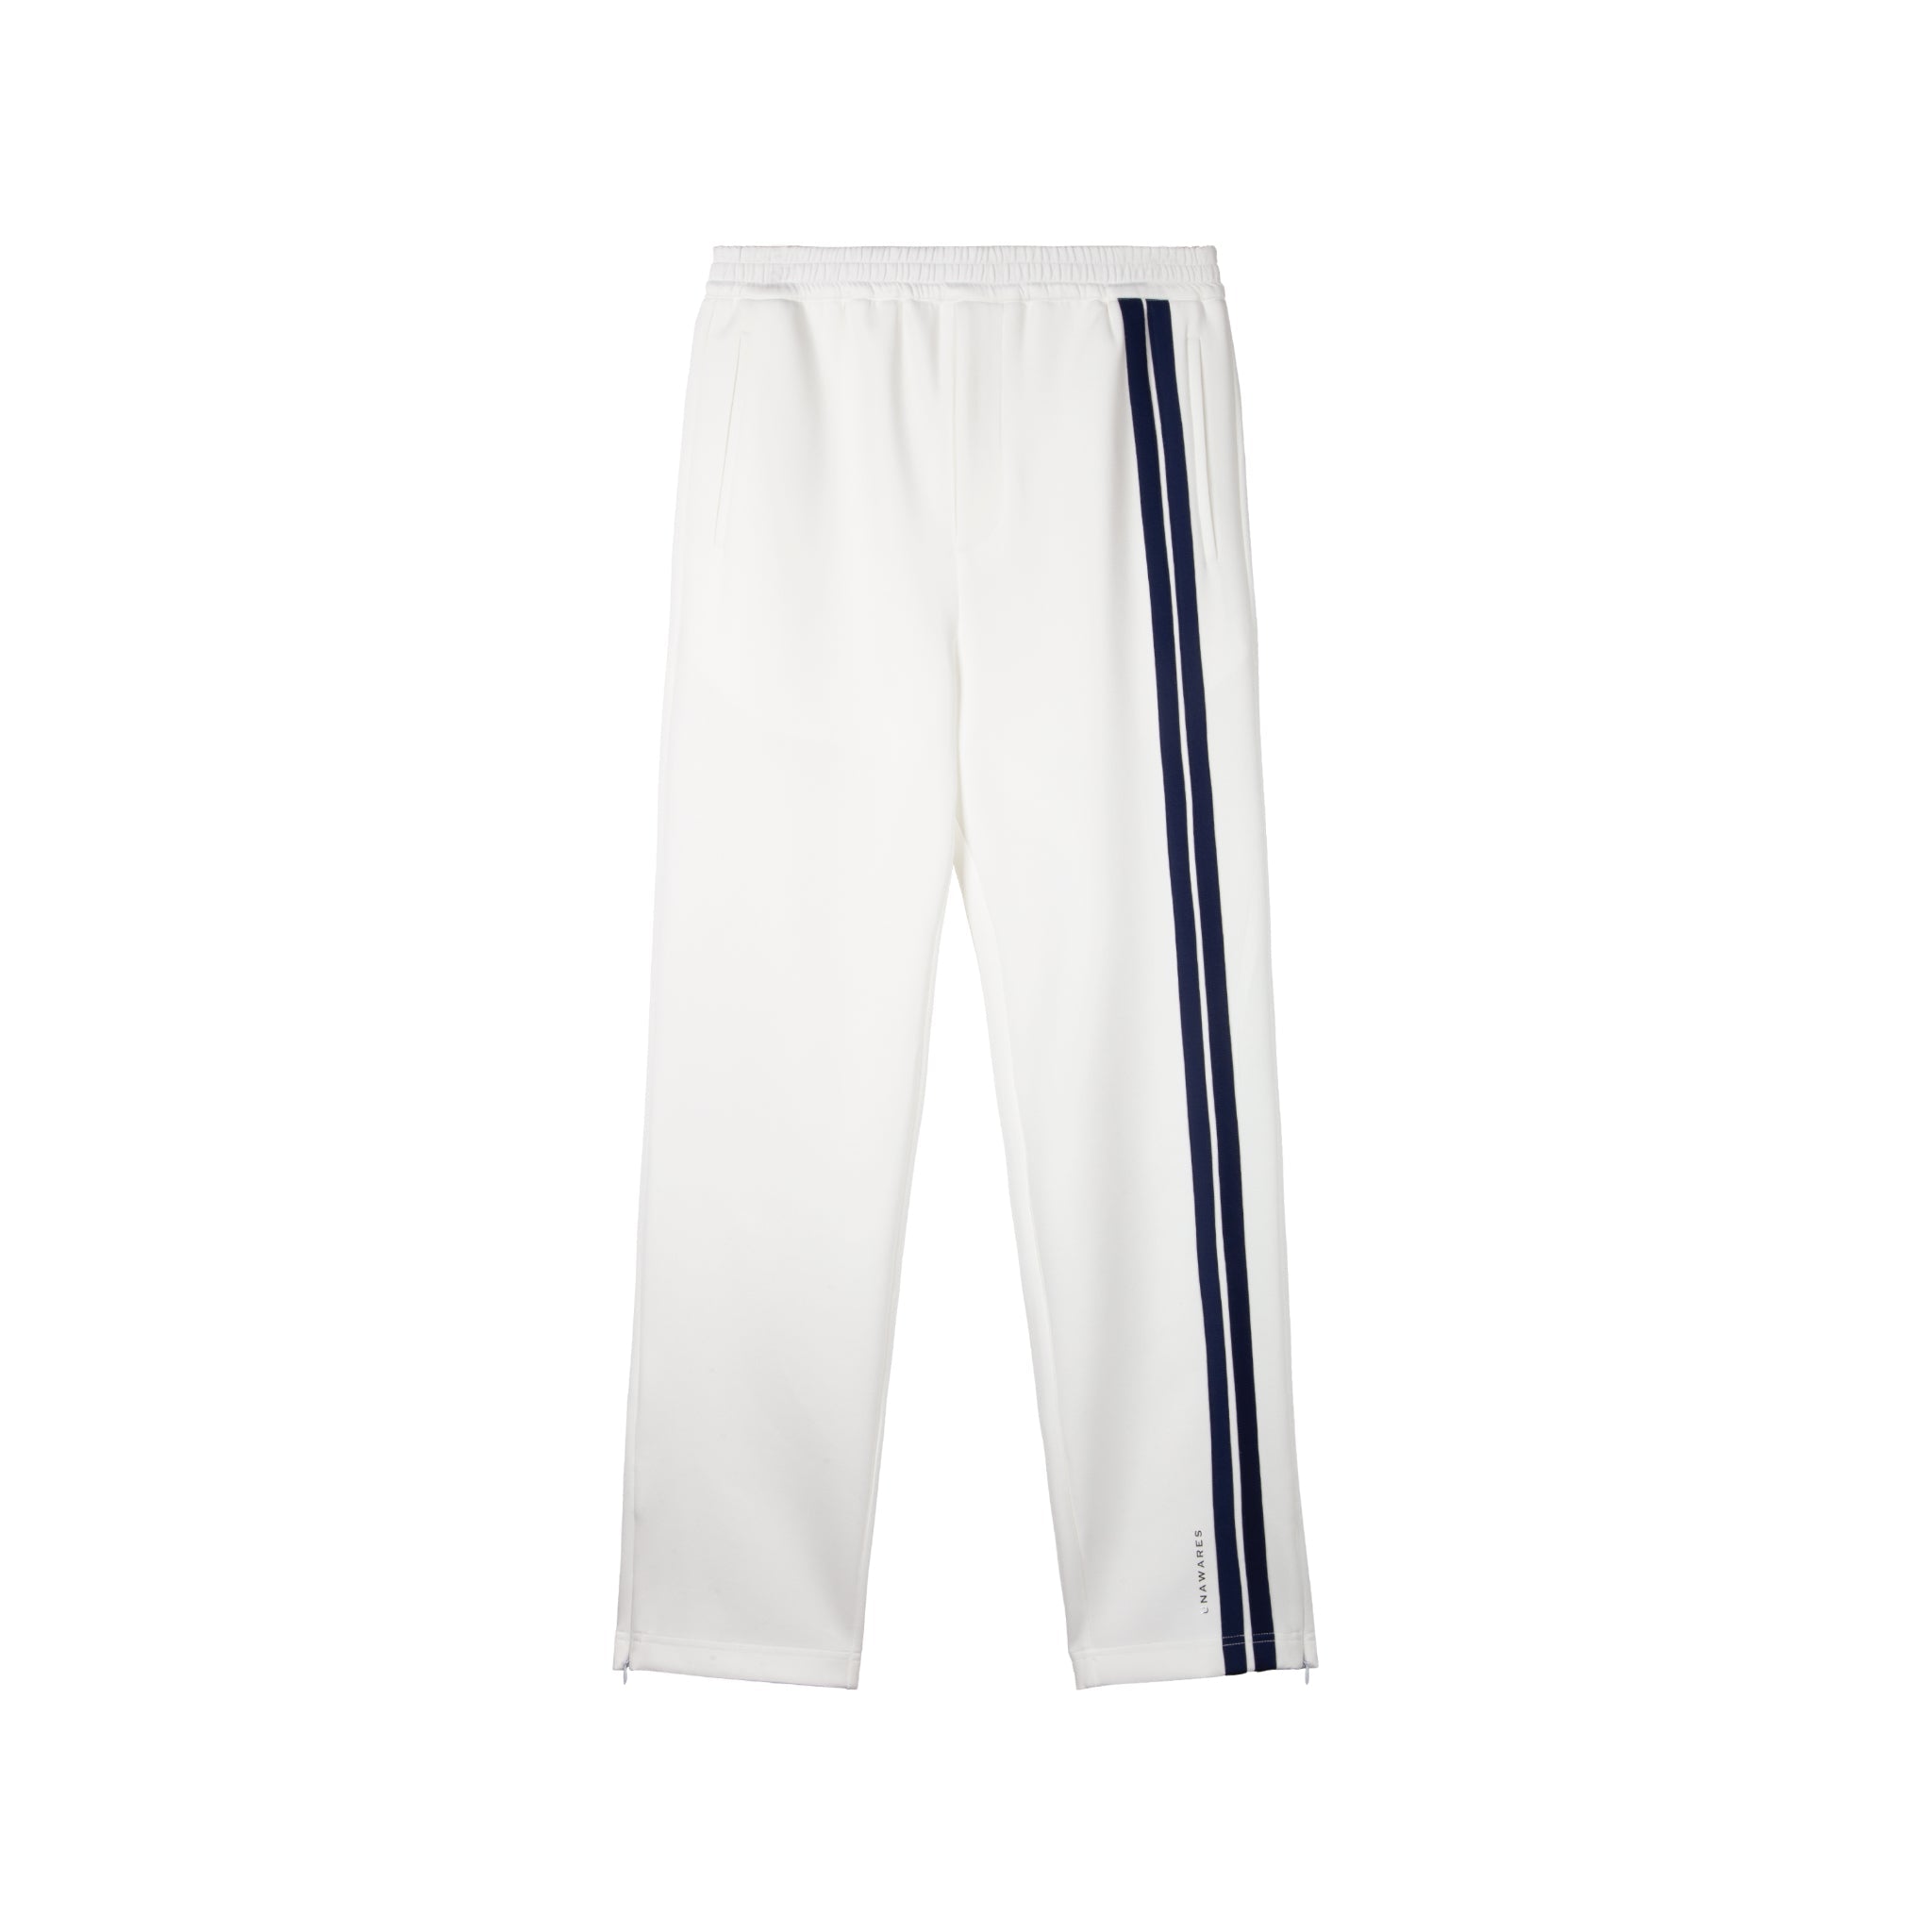 UNAWARES White Customized Silver Print with White Striped Sports Pants